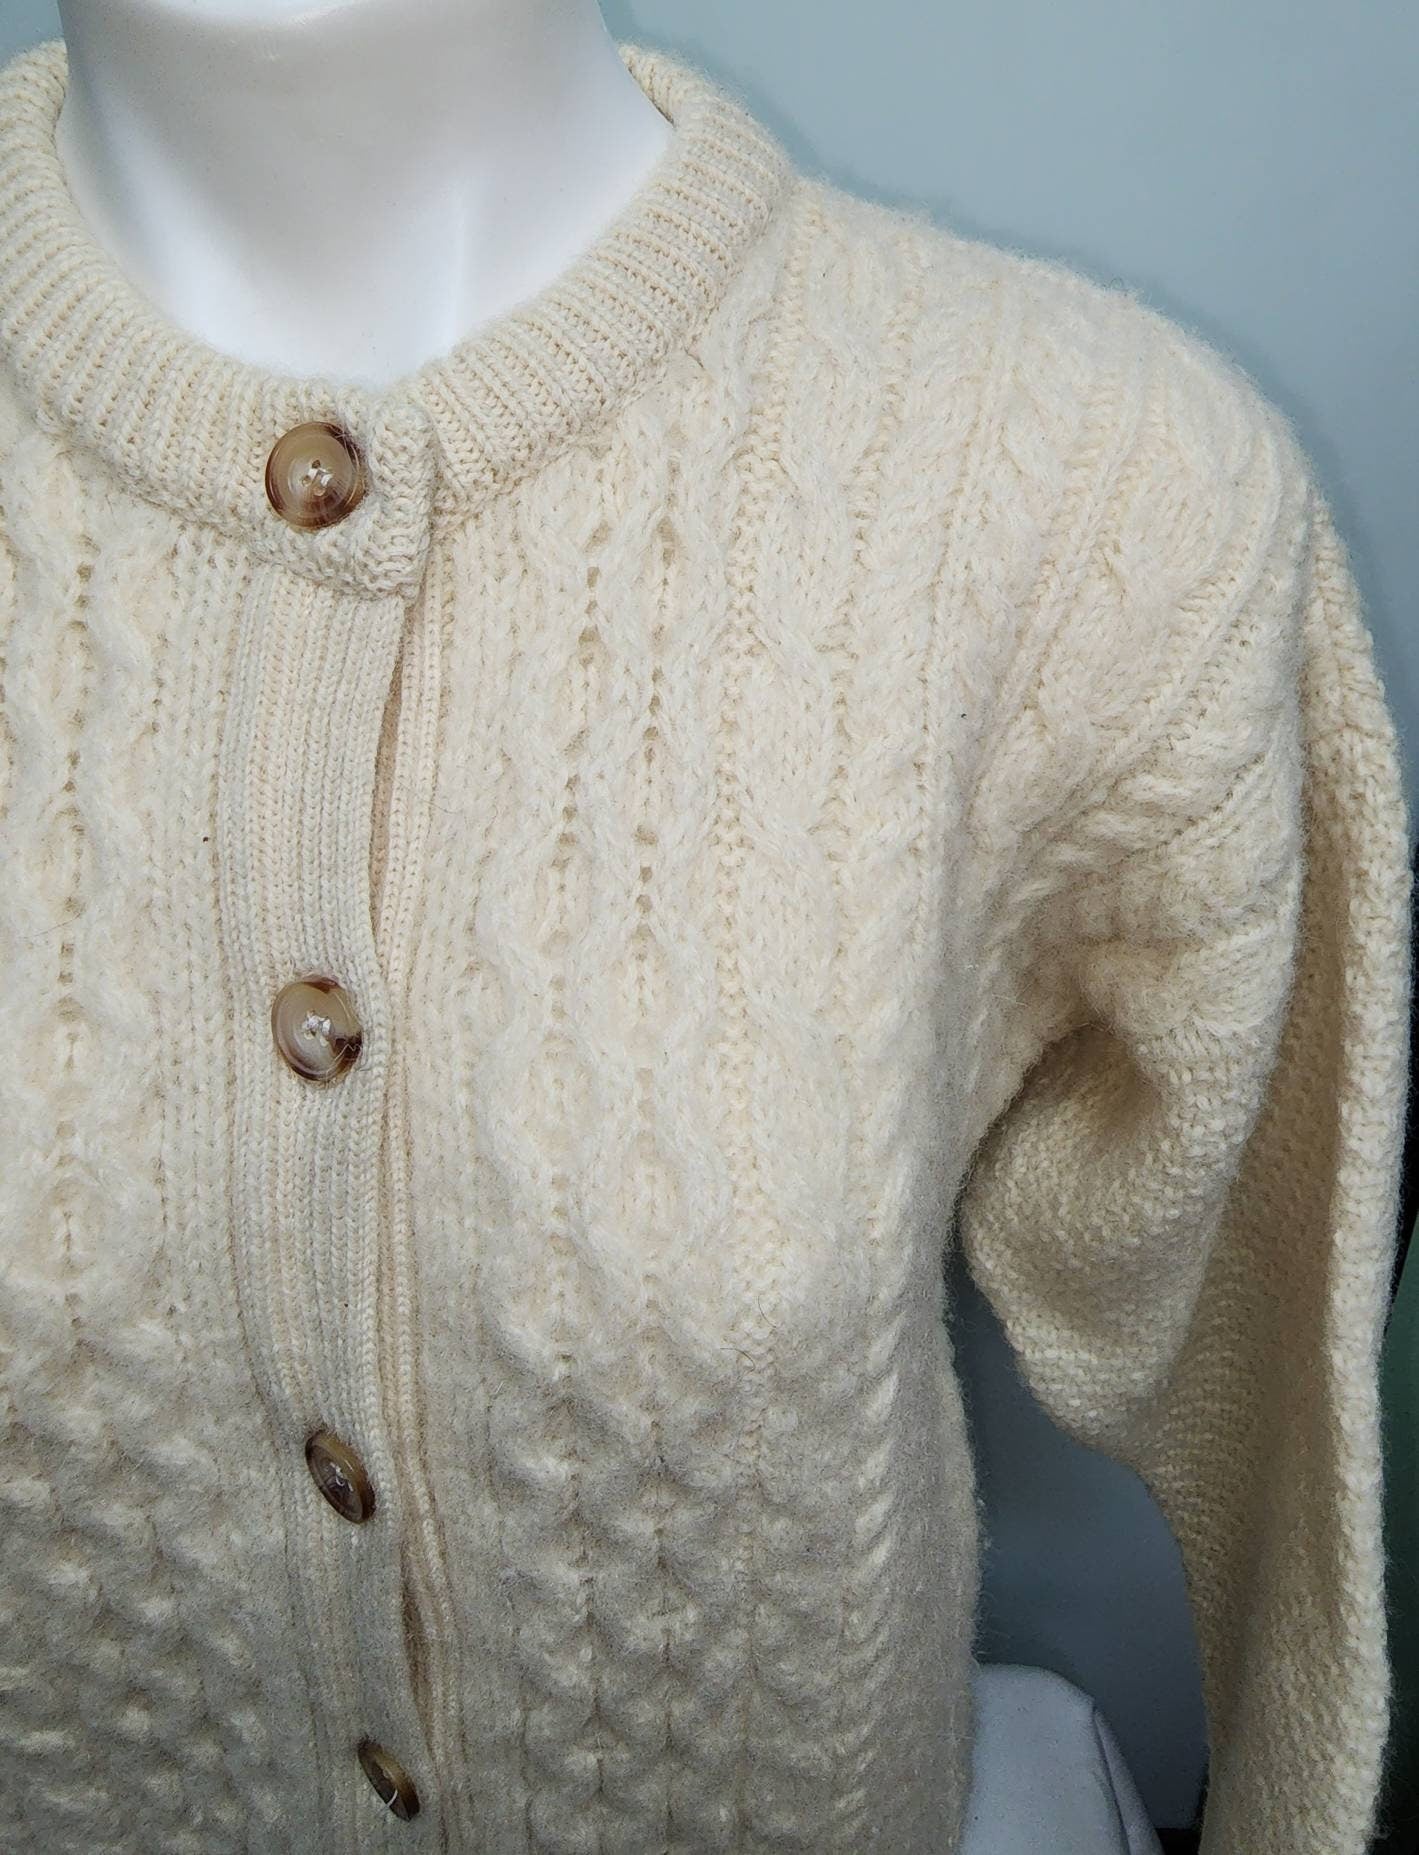 Vintage Wool Sweater 1990s Cream Wool Cable Knit Cardigan Sweater Scotland Wood Buttons Highland Home Industries Boho S